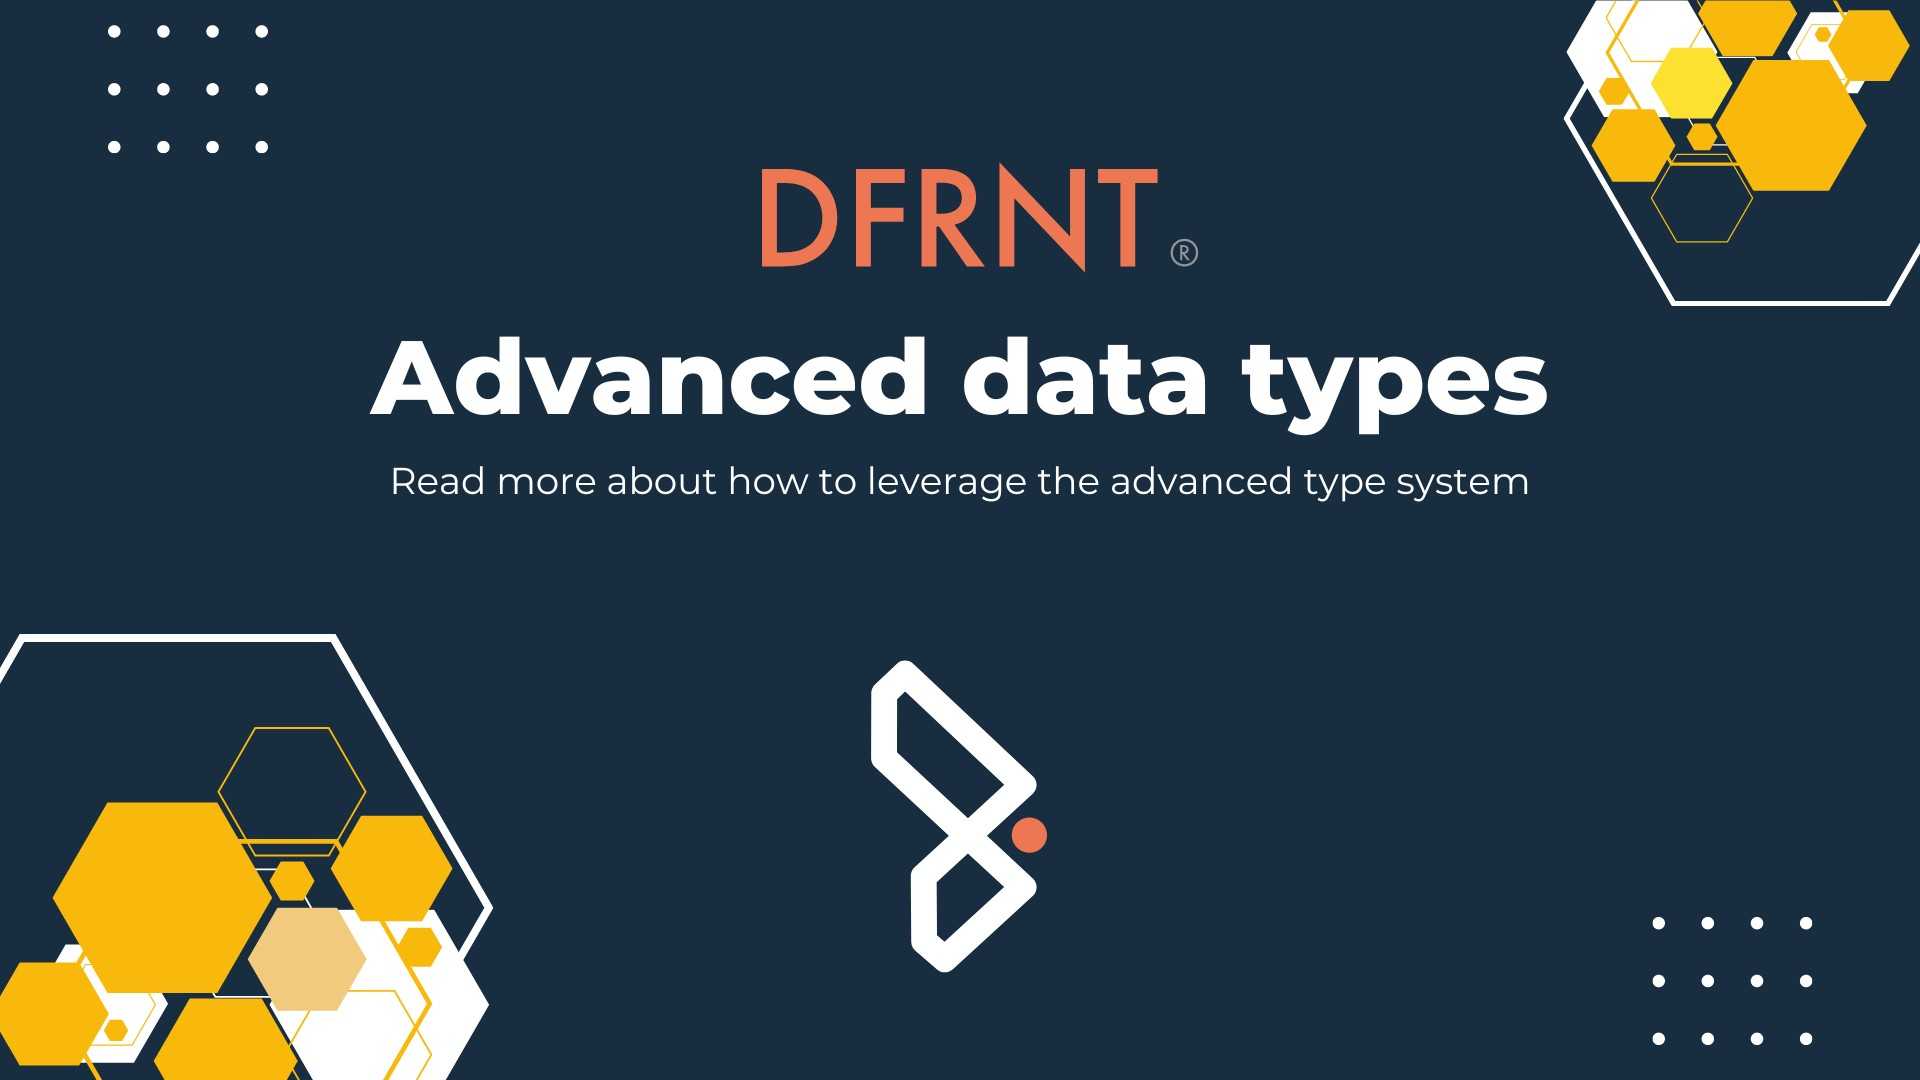 New release with advanced data types